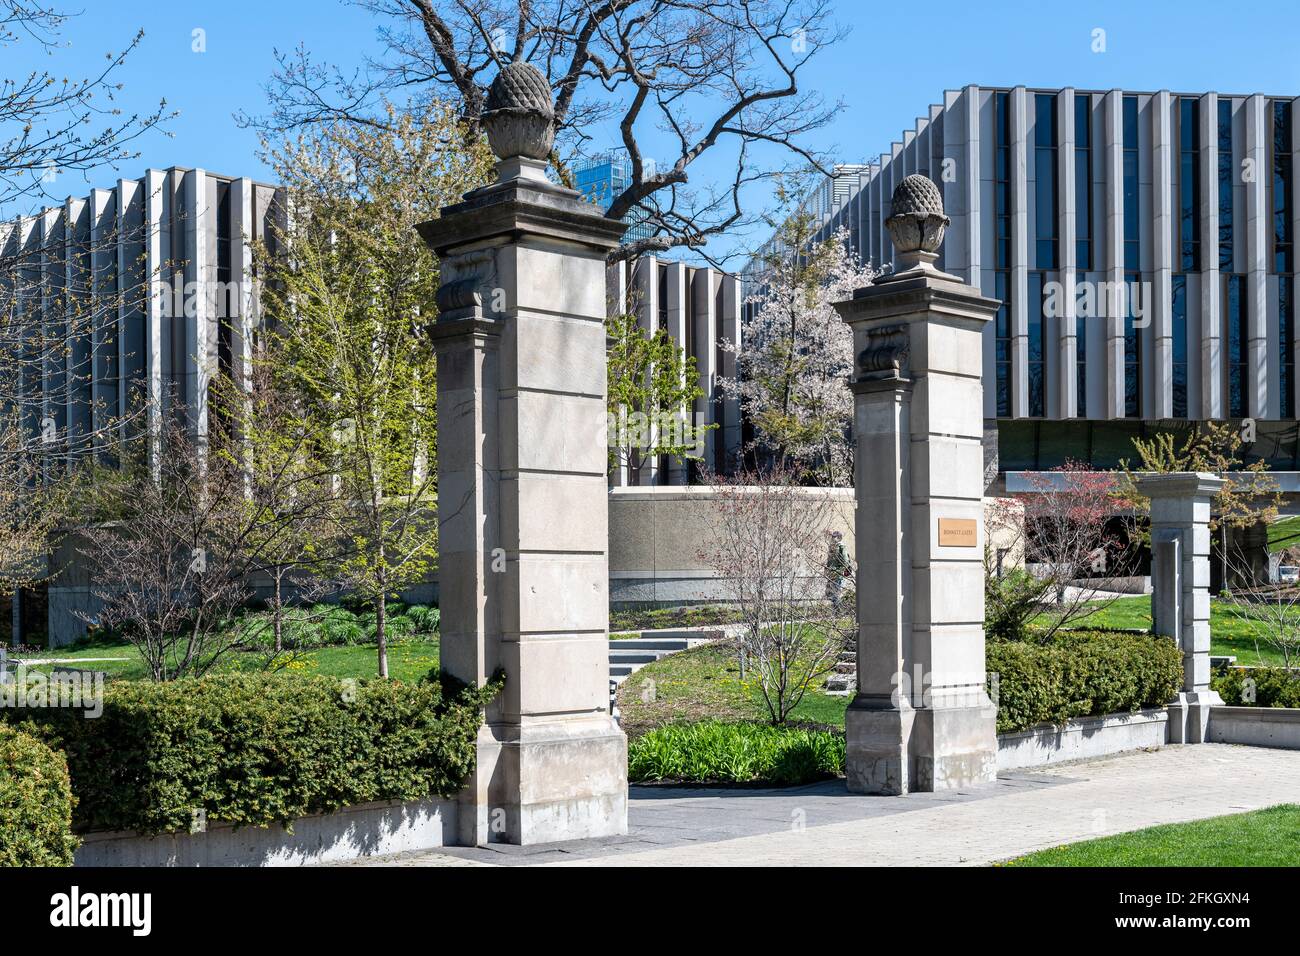 Bennet Gates which is an entrance to the Philosopher's Walk in Hoskin Avenue in Toronto downtown, Canada Stock Photo